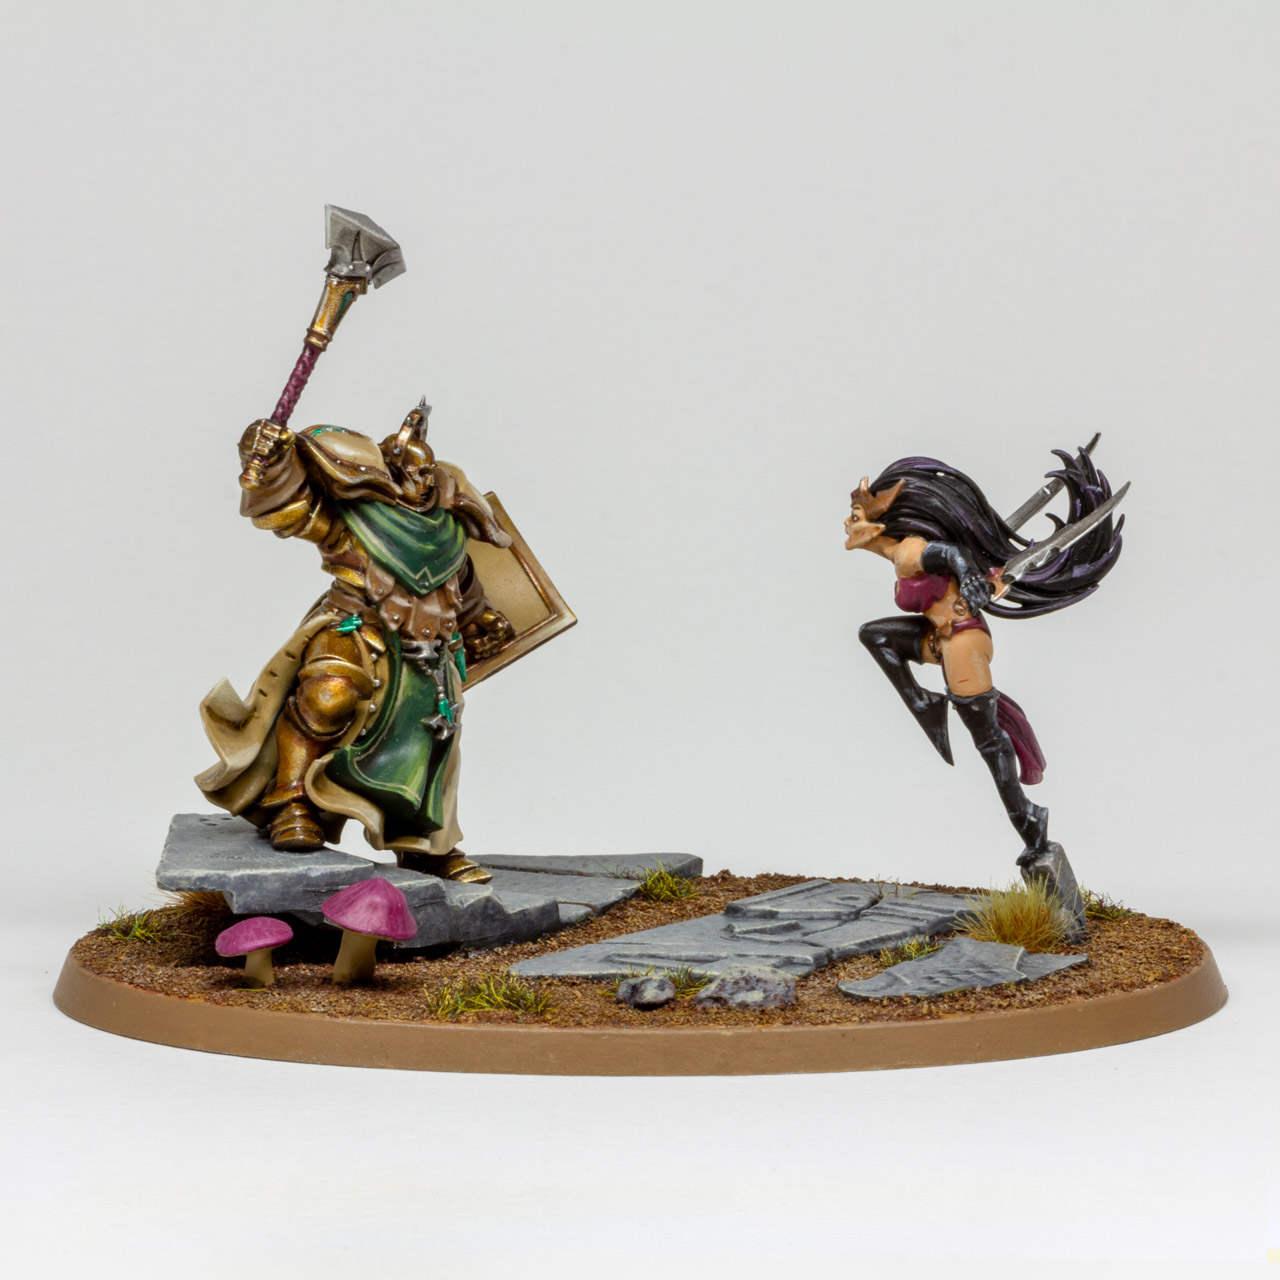 Diorama of a knight duelling an elf